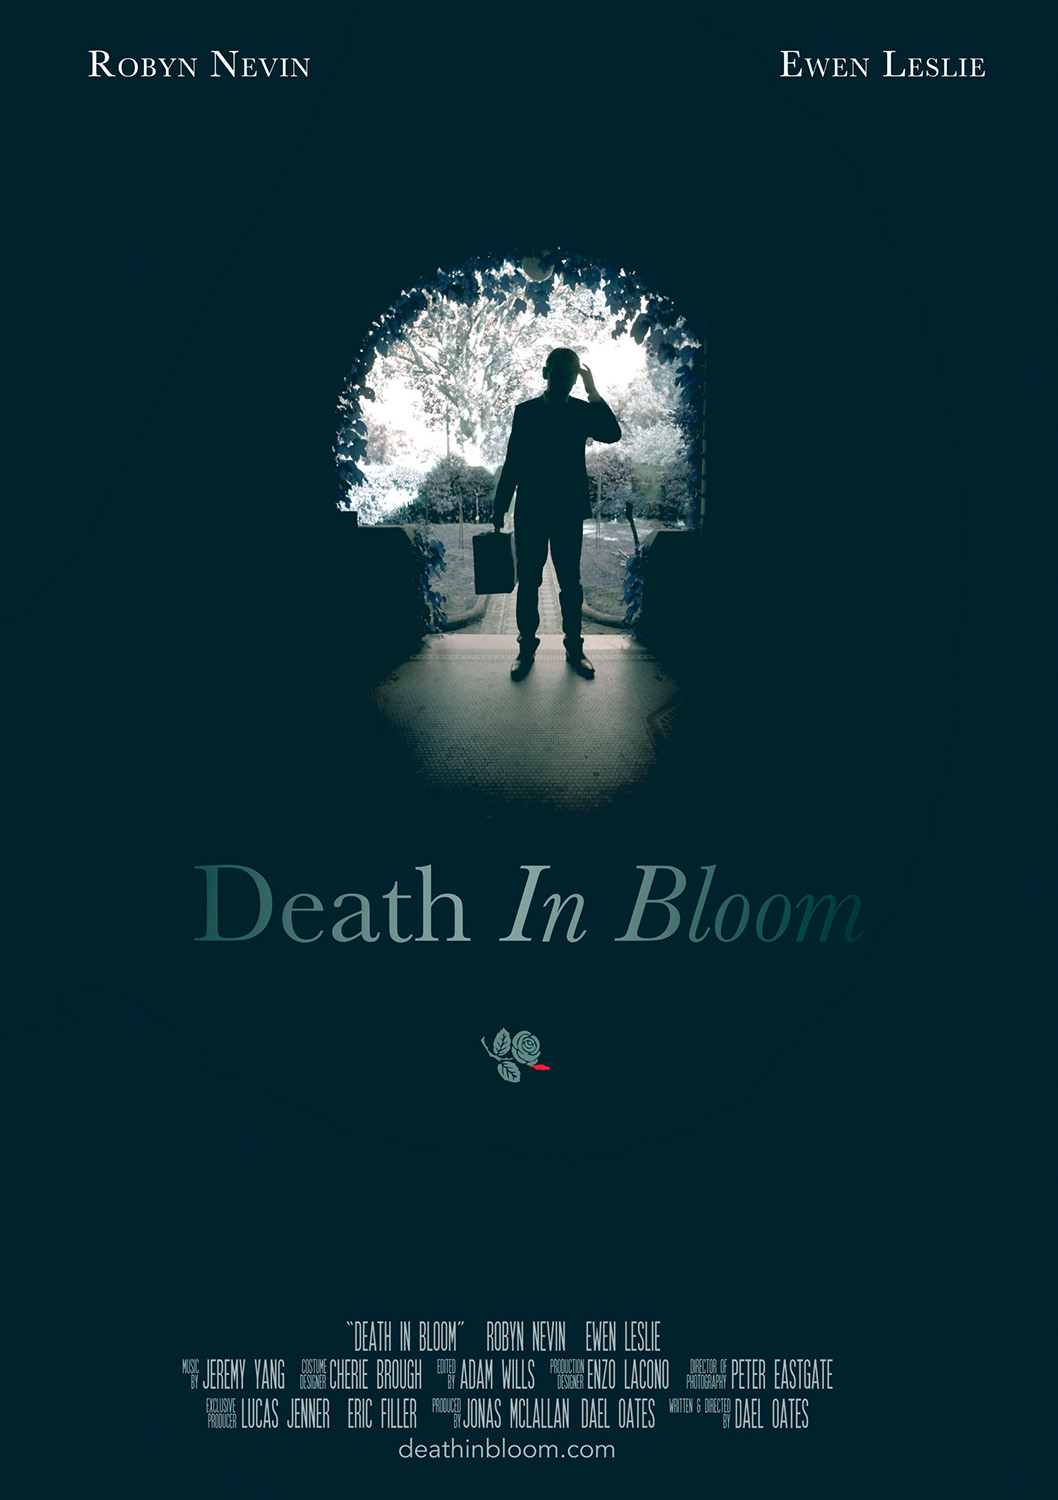 DEATH IN BLOOM